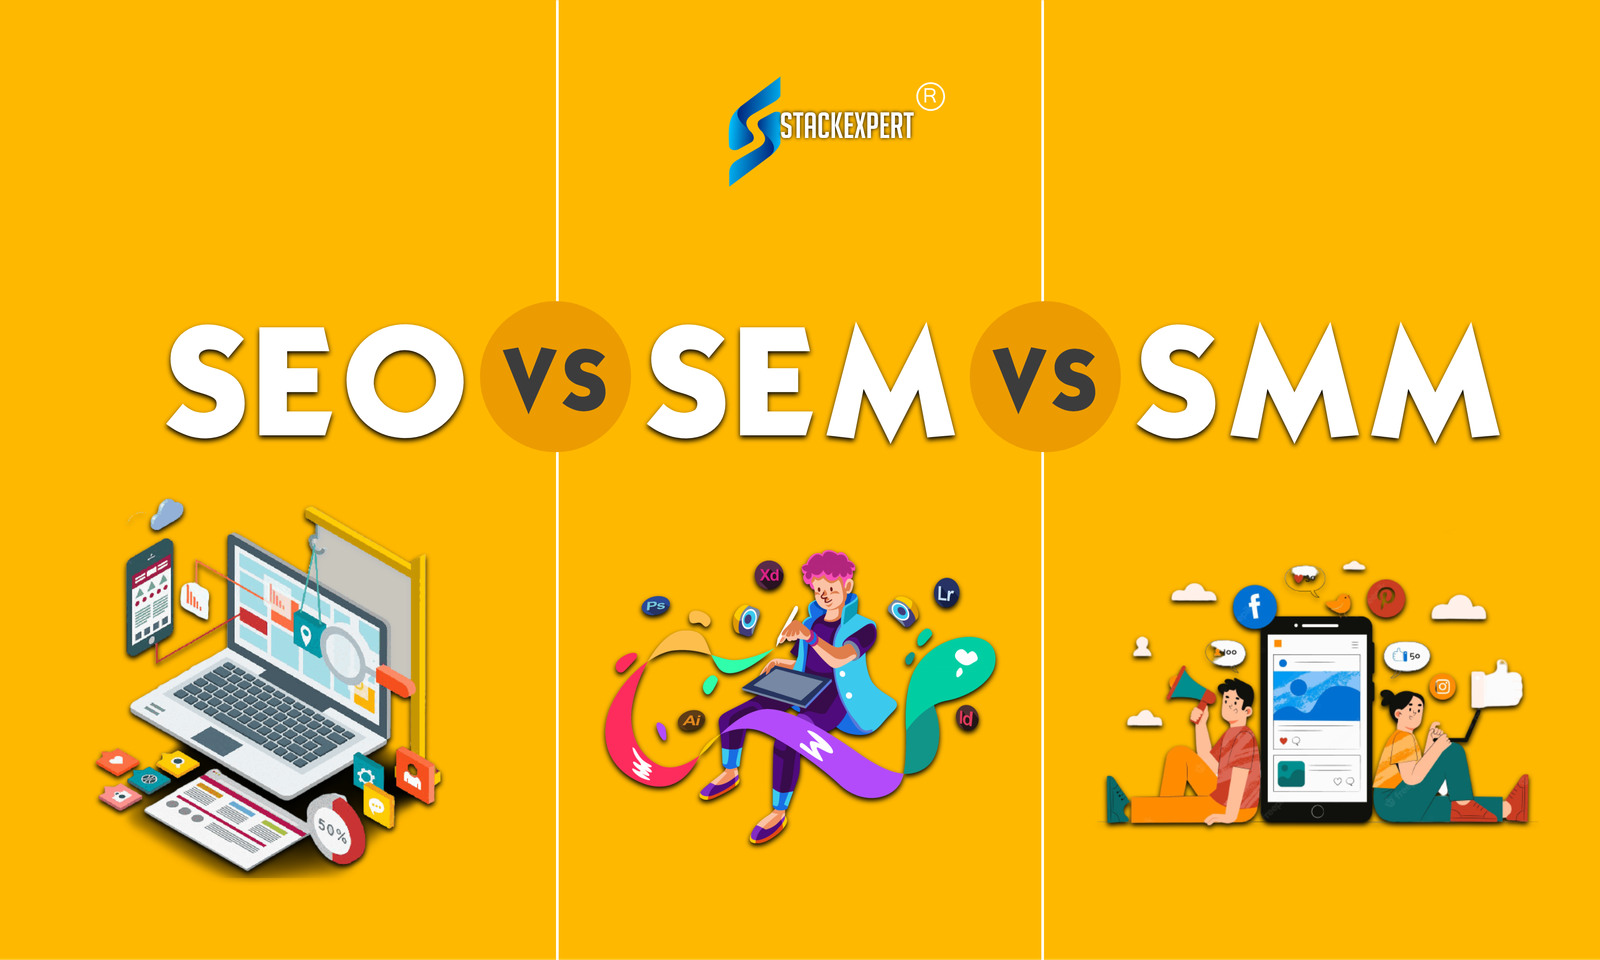 Comparison between SEO, SEM, and, SMM